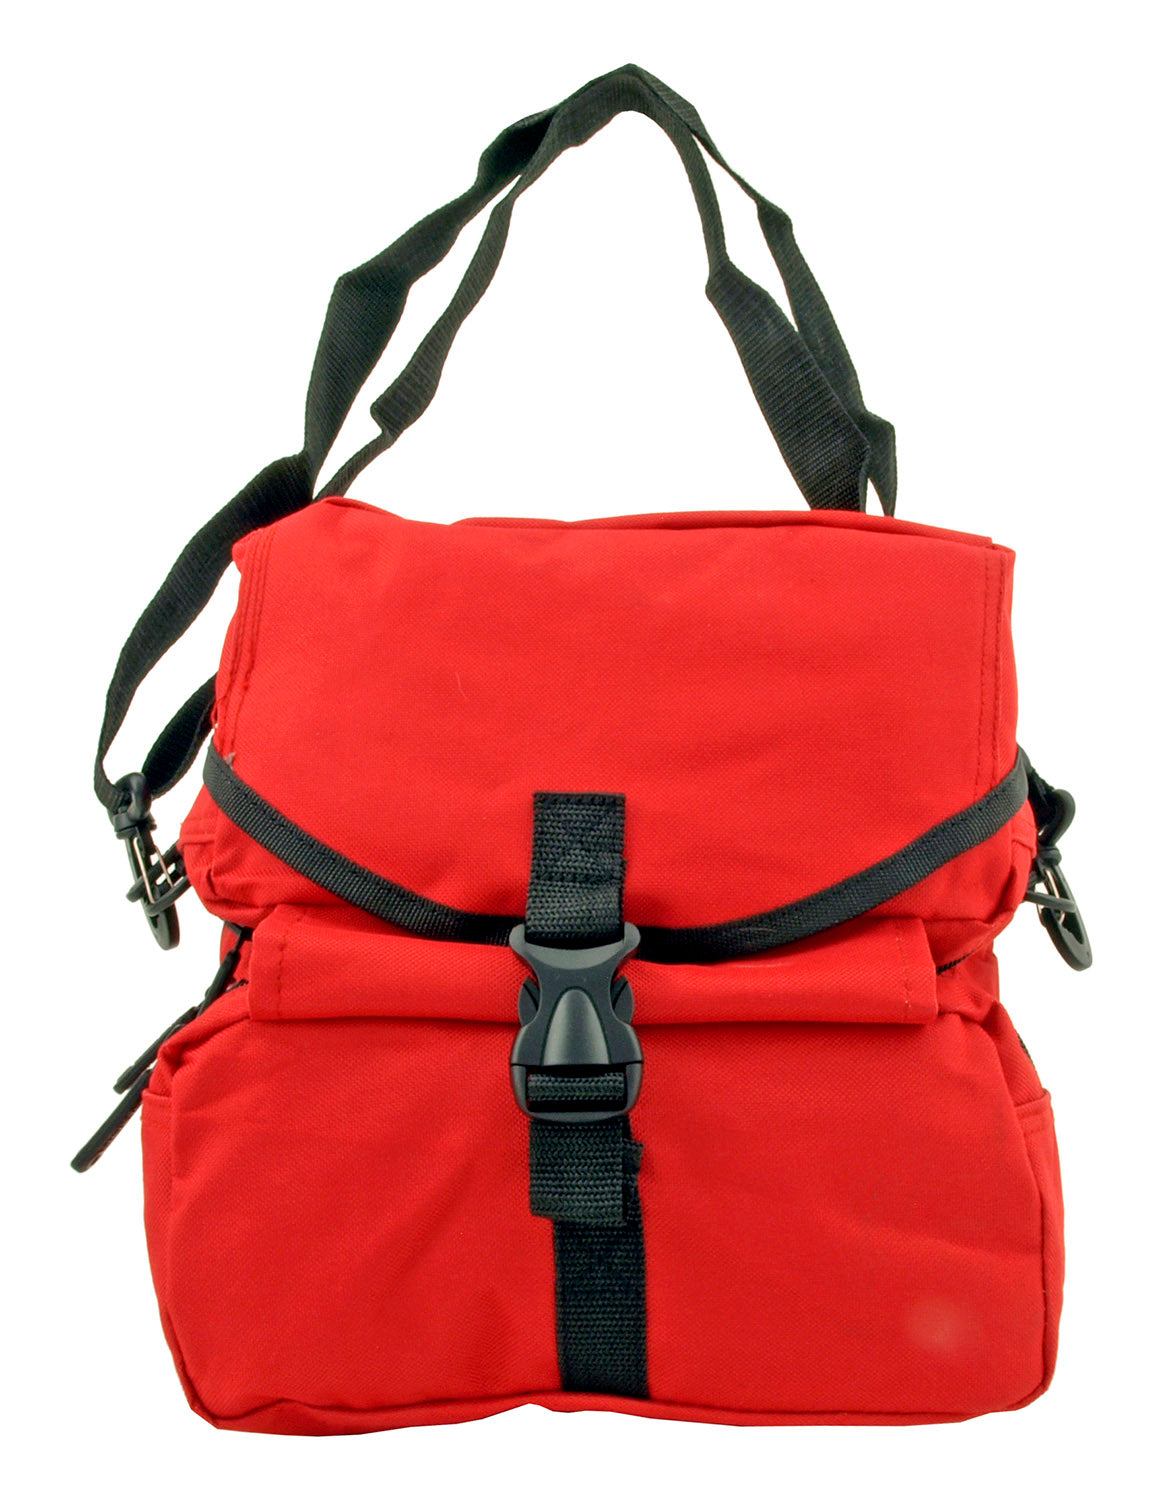 East West Tactical Folding Medical Egress Molle Attachment Rescue Bag - Red